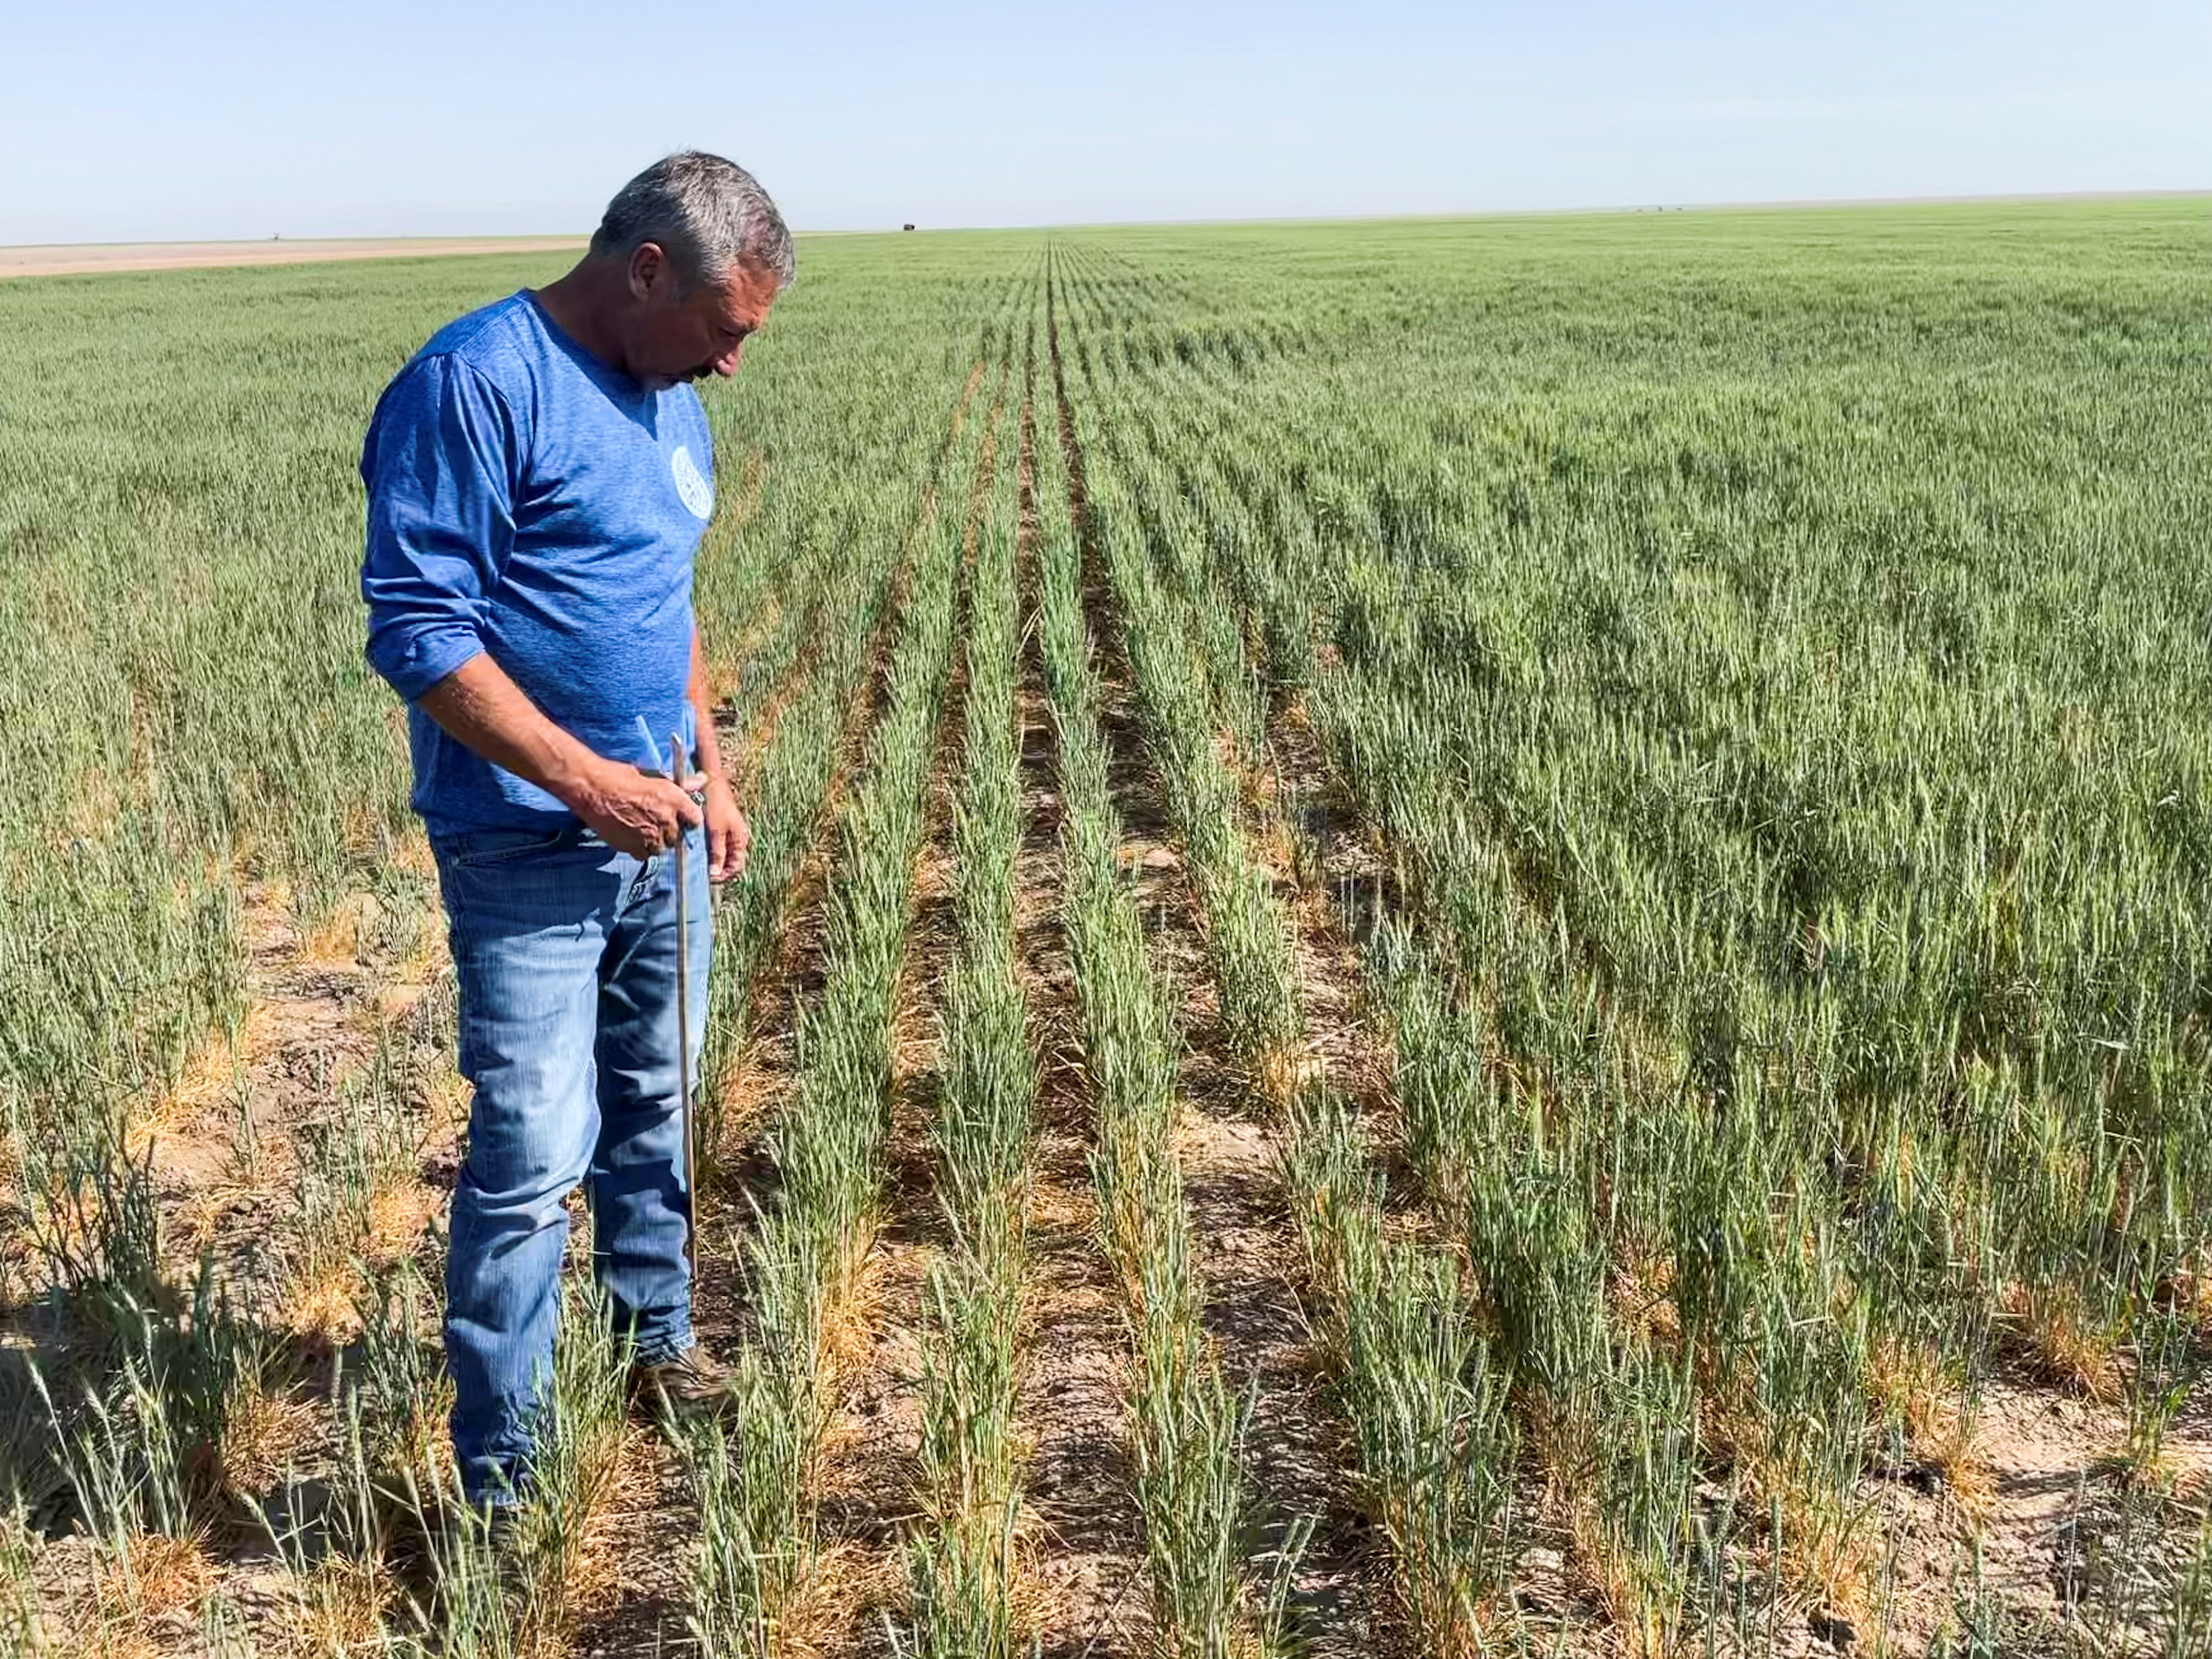 Gary Millershaski, a farmer and scout on the Wheat Quality Council's Kansas wheat tour, inspects winter wheat stunted by drought near Syracuse